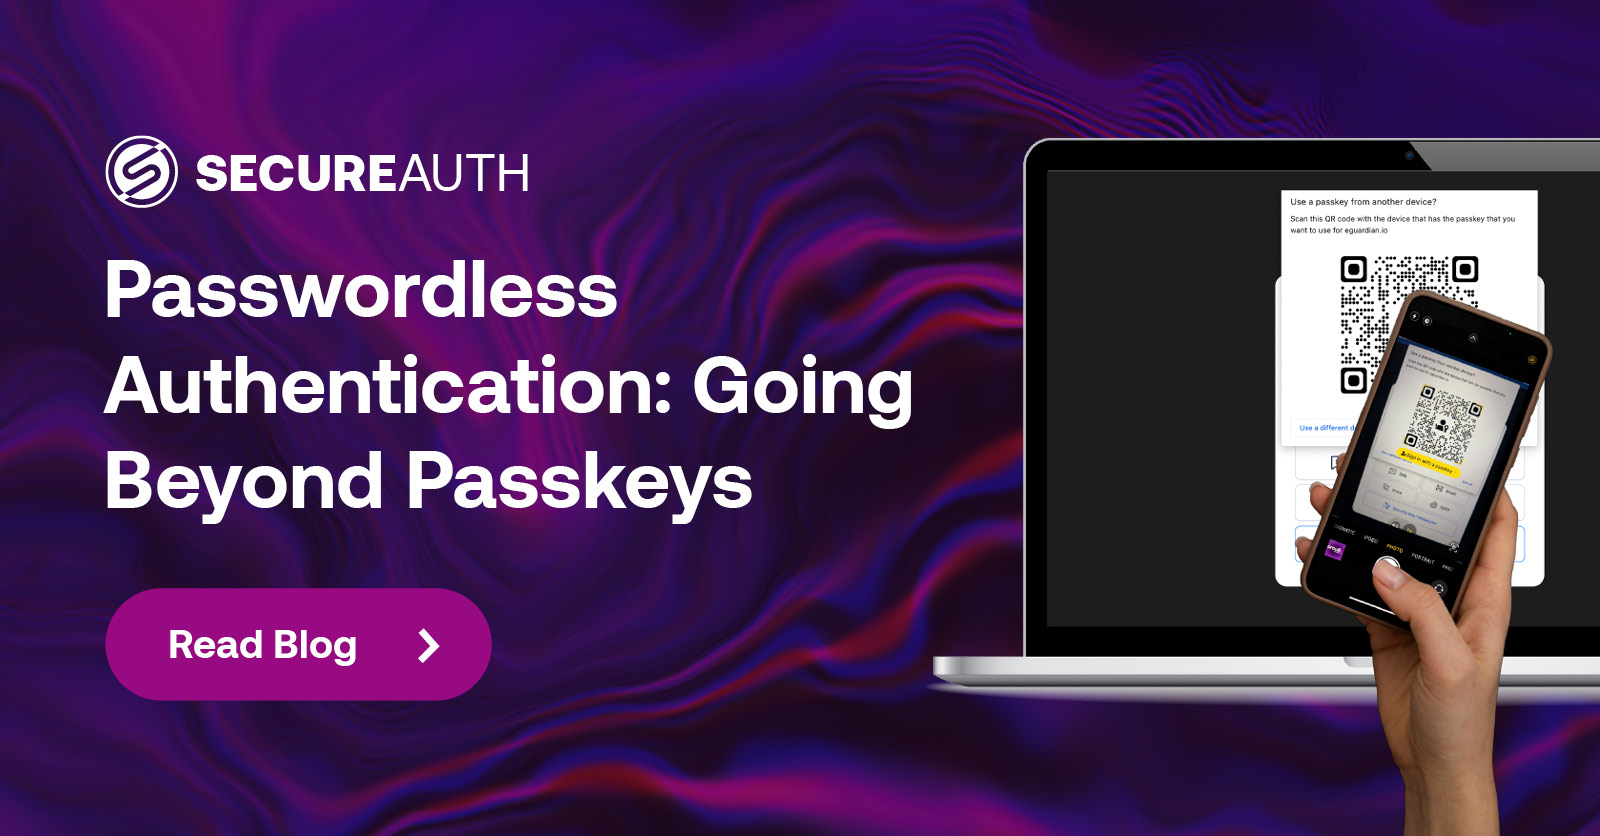 Passwordless login with passkeys, Authentication